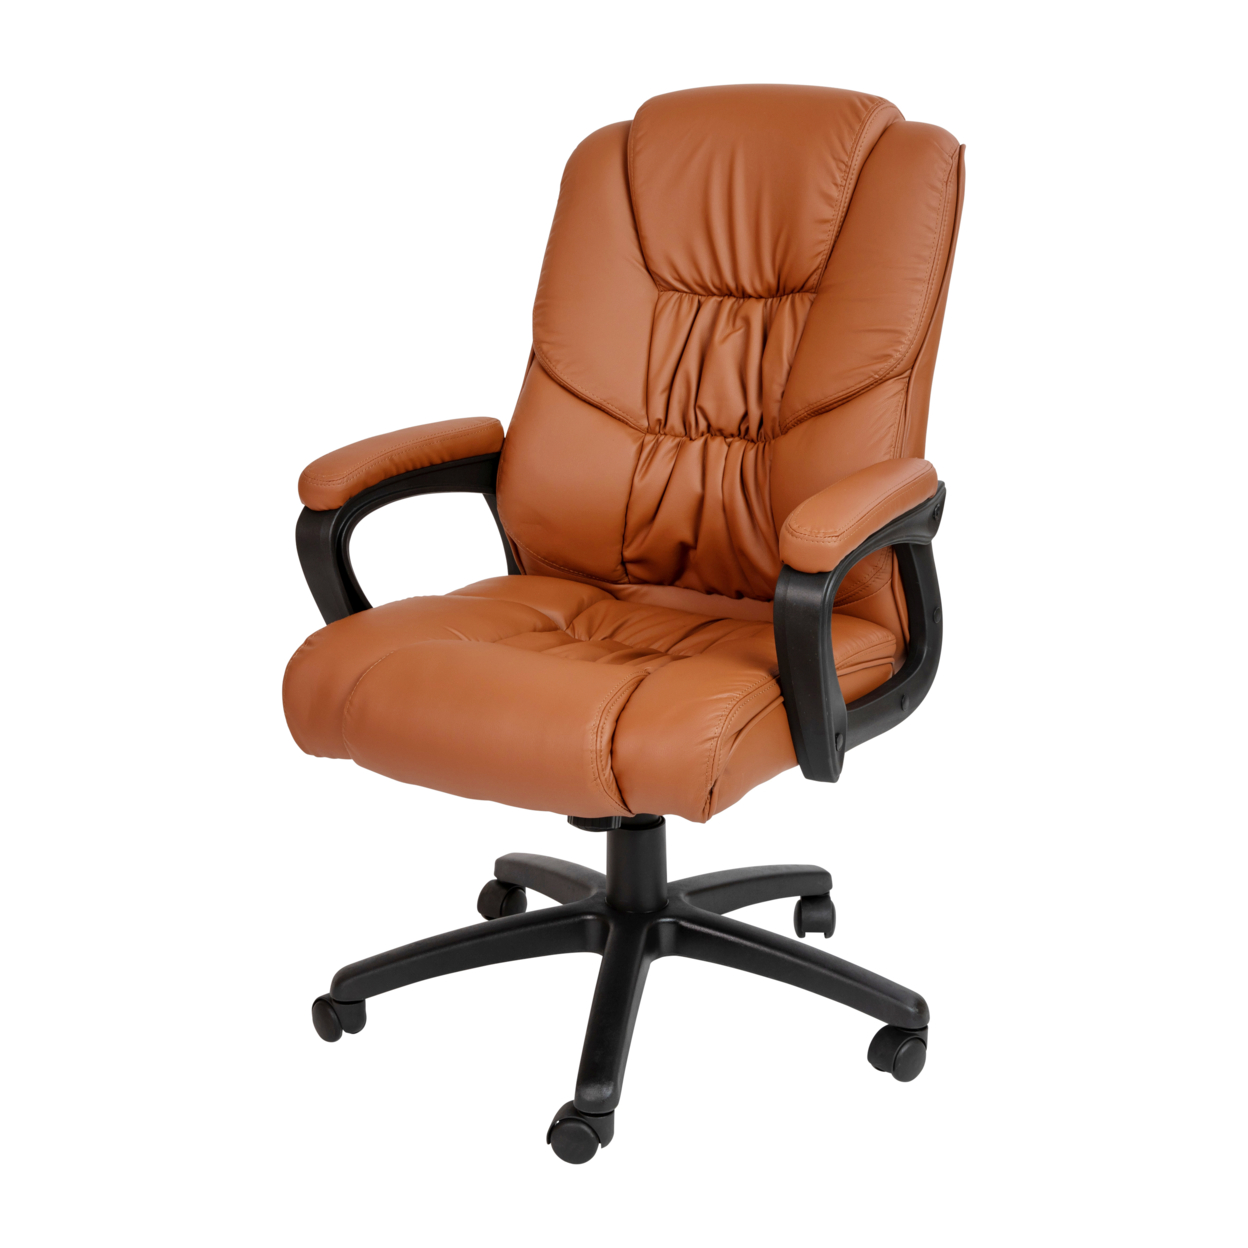 Flash Fundamentals Big & Tall 400 Lb. Rated Brown LeatherSoft Swivel Office Chair With Padded Arms, BIFMA Certified